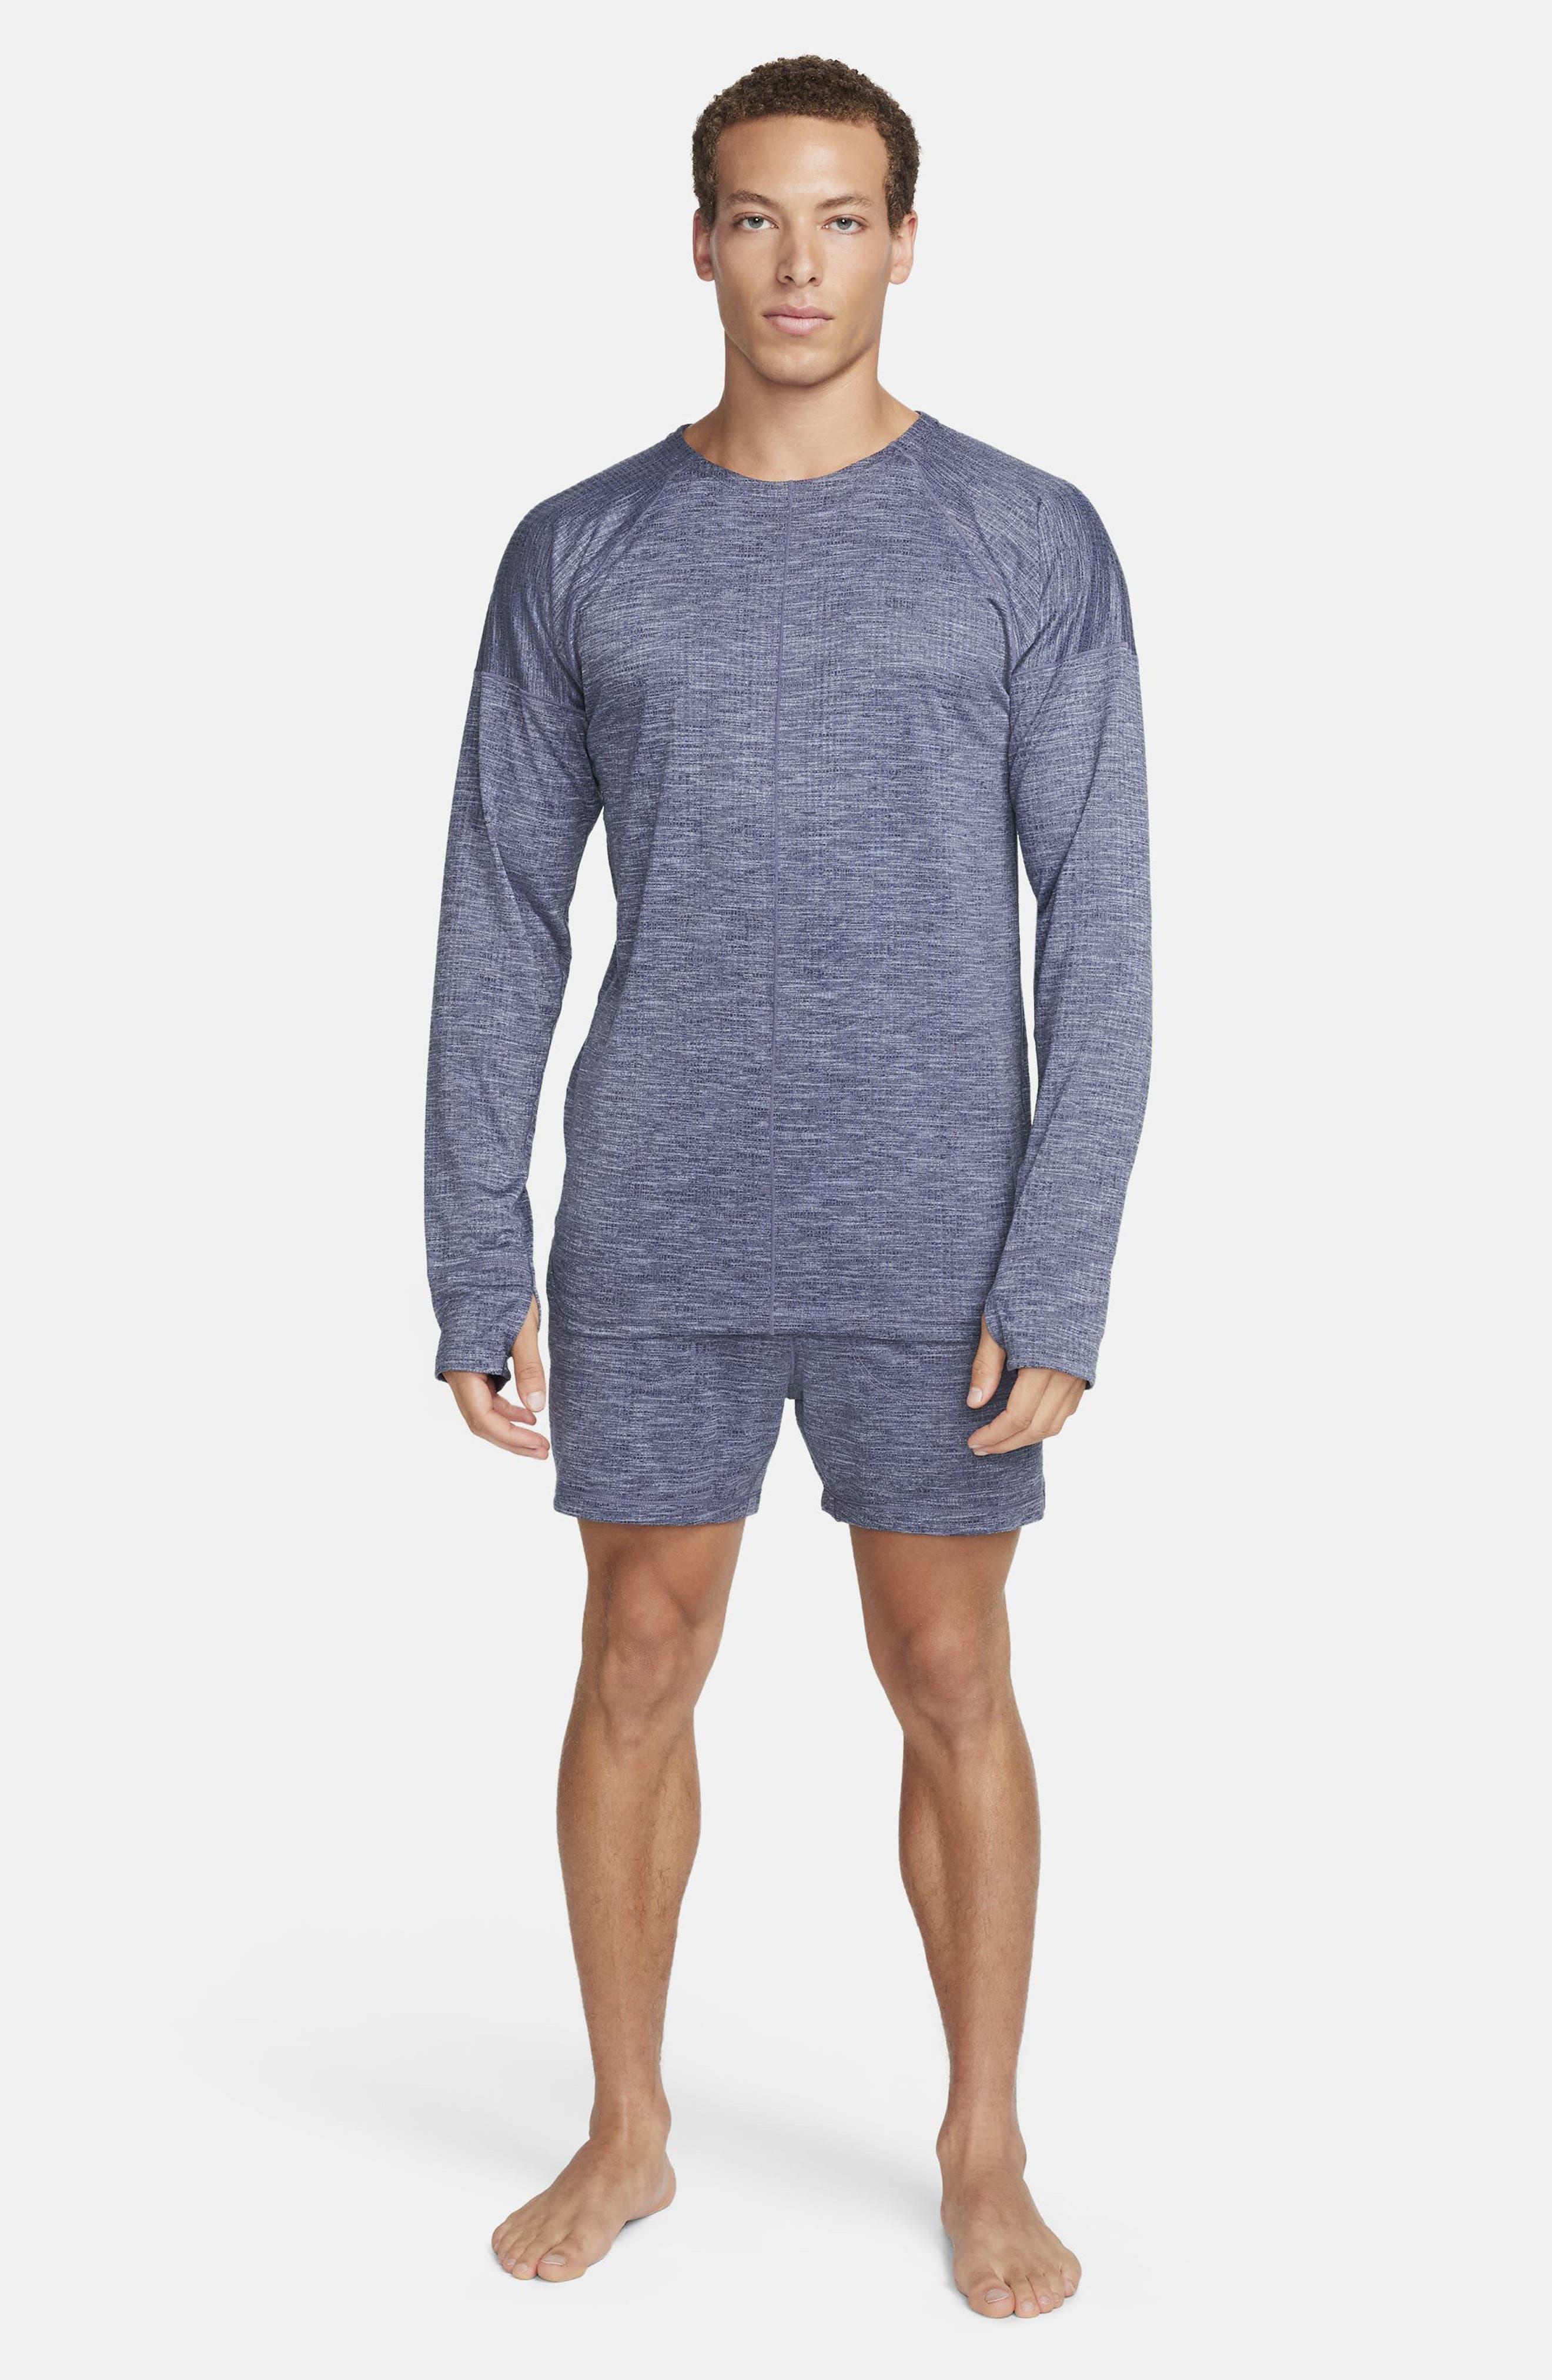 Nike Dri-fit Long Sleeve Yoga Top in Blue for Men